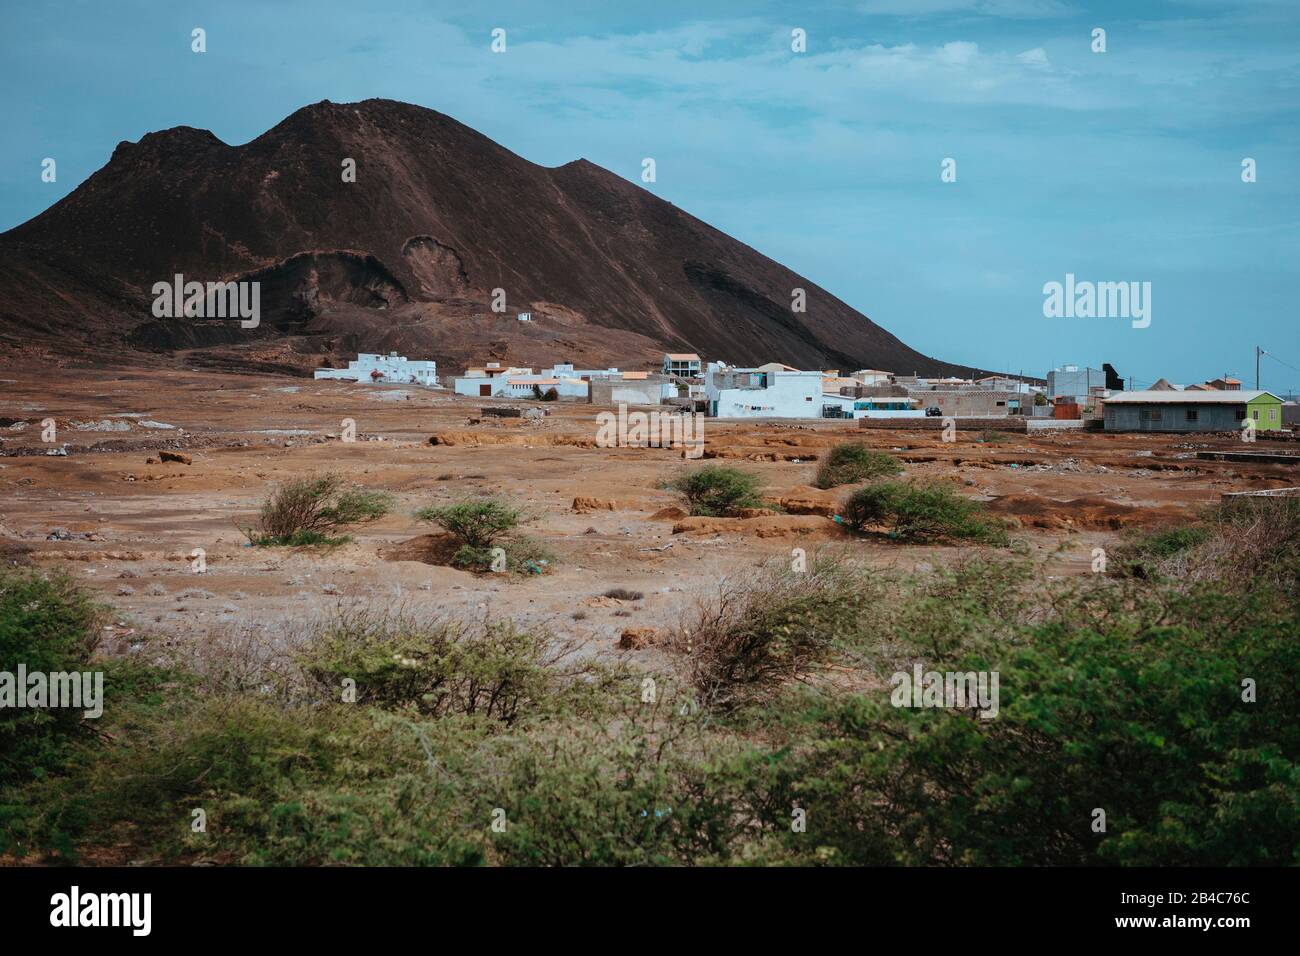 Local dwelling in front of Calhau volcanic crater, Cape Verde - Sao Vicente Island. Single martian like dry red rock stand out from barren desert ground. Stock Photo